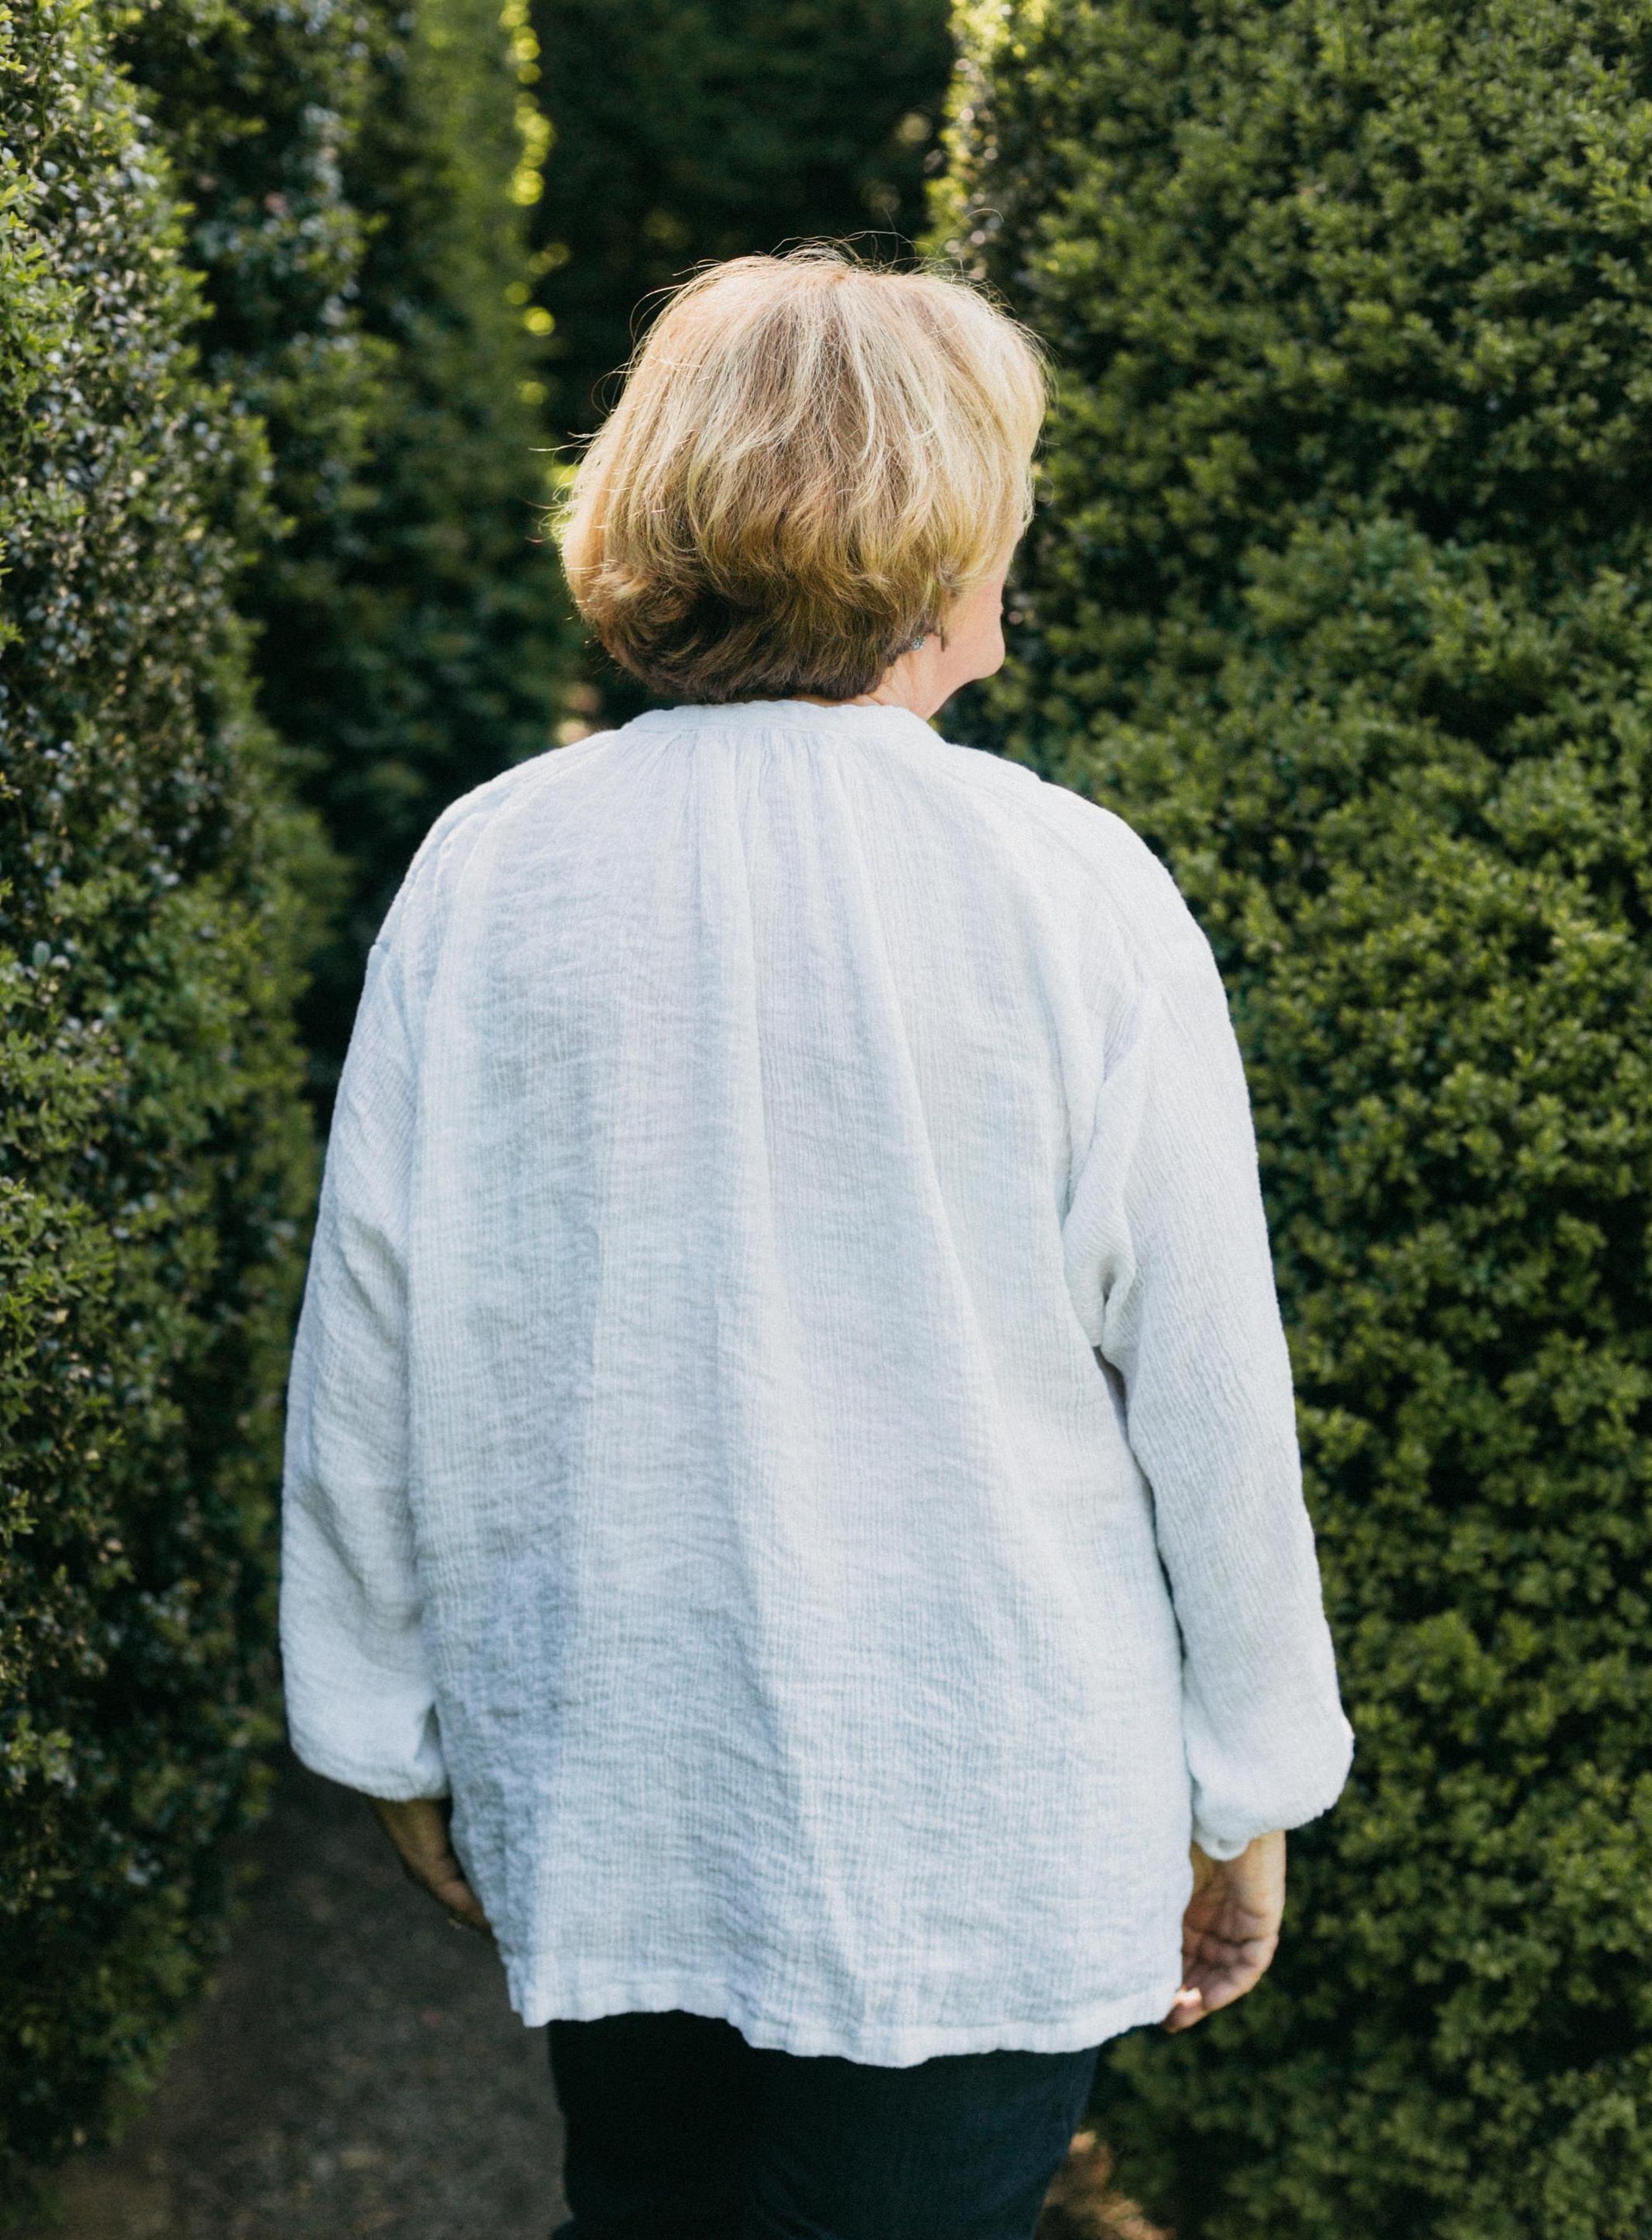 Older woman wearing French Cheesemaker's Smock made from white linen, standing by a large hedge with her back turned.